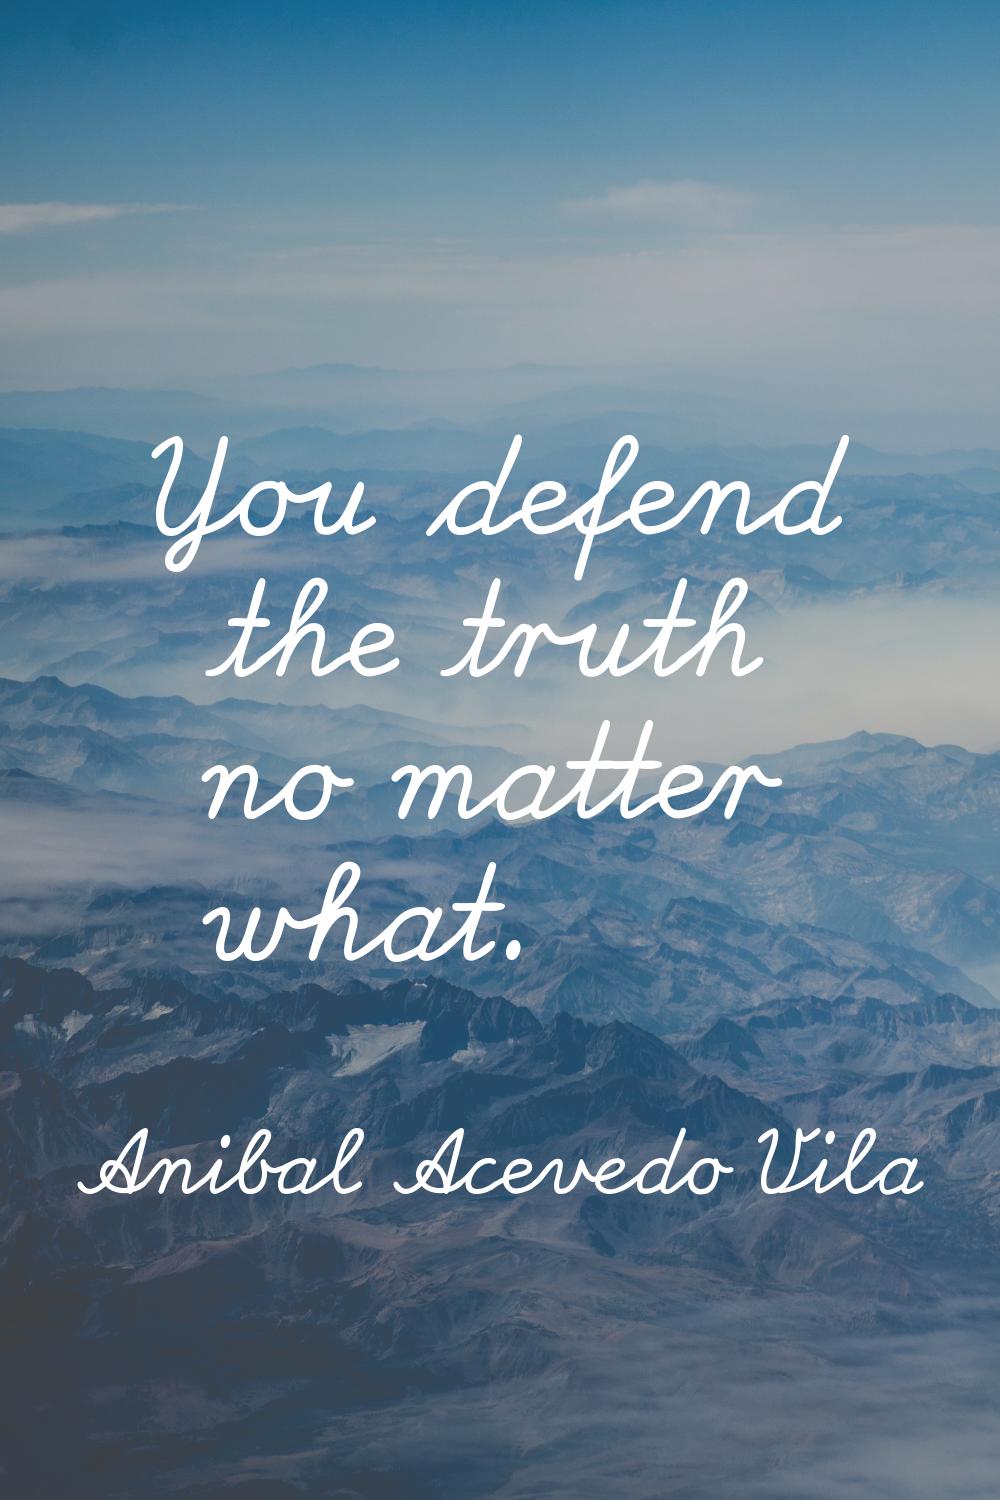 You defend the truth no matter what.